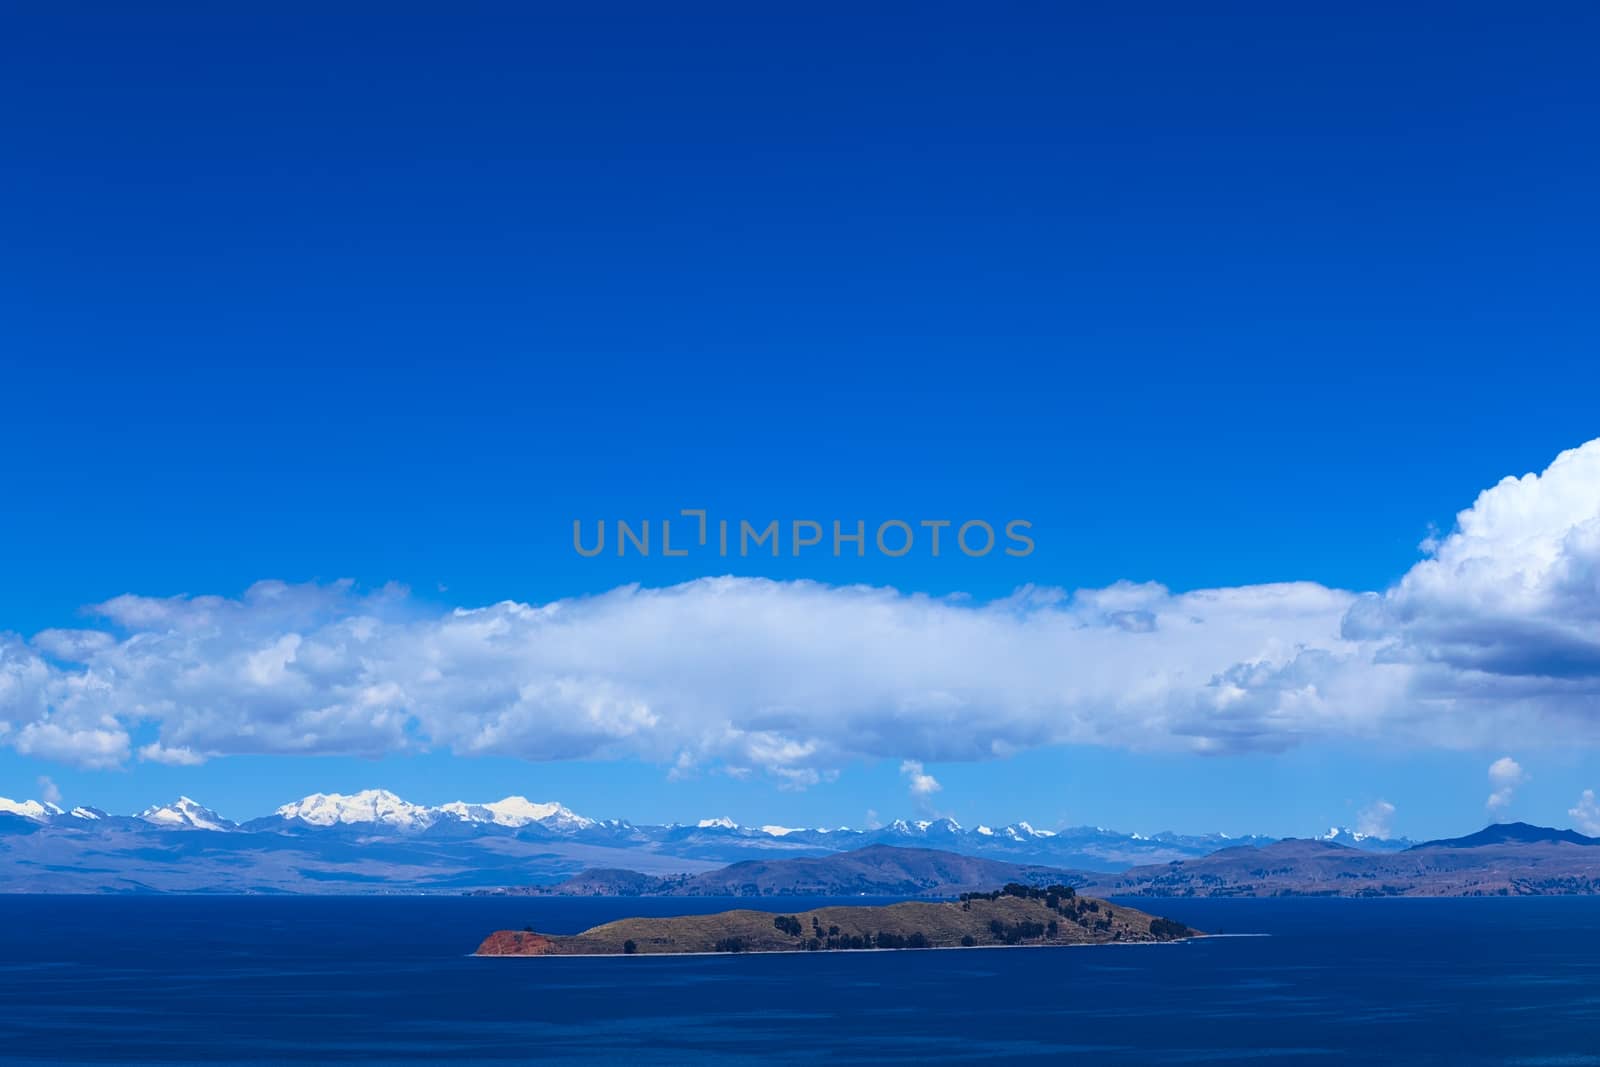 The Isla de la Luna (Island of the Moon) with the snow-capped mountains of the Andes in the back photographed from the Isla del Sol (Island of the Sun) in Lake Titicaca, Bolivia. The islands are a popular travel destination.  